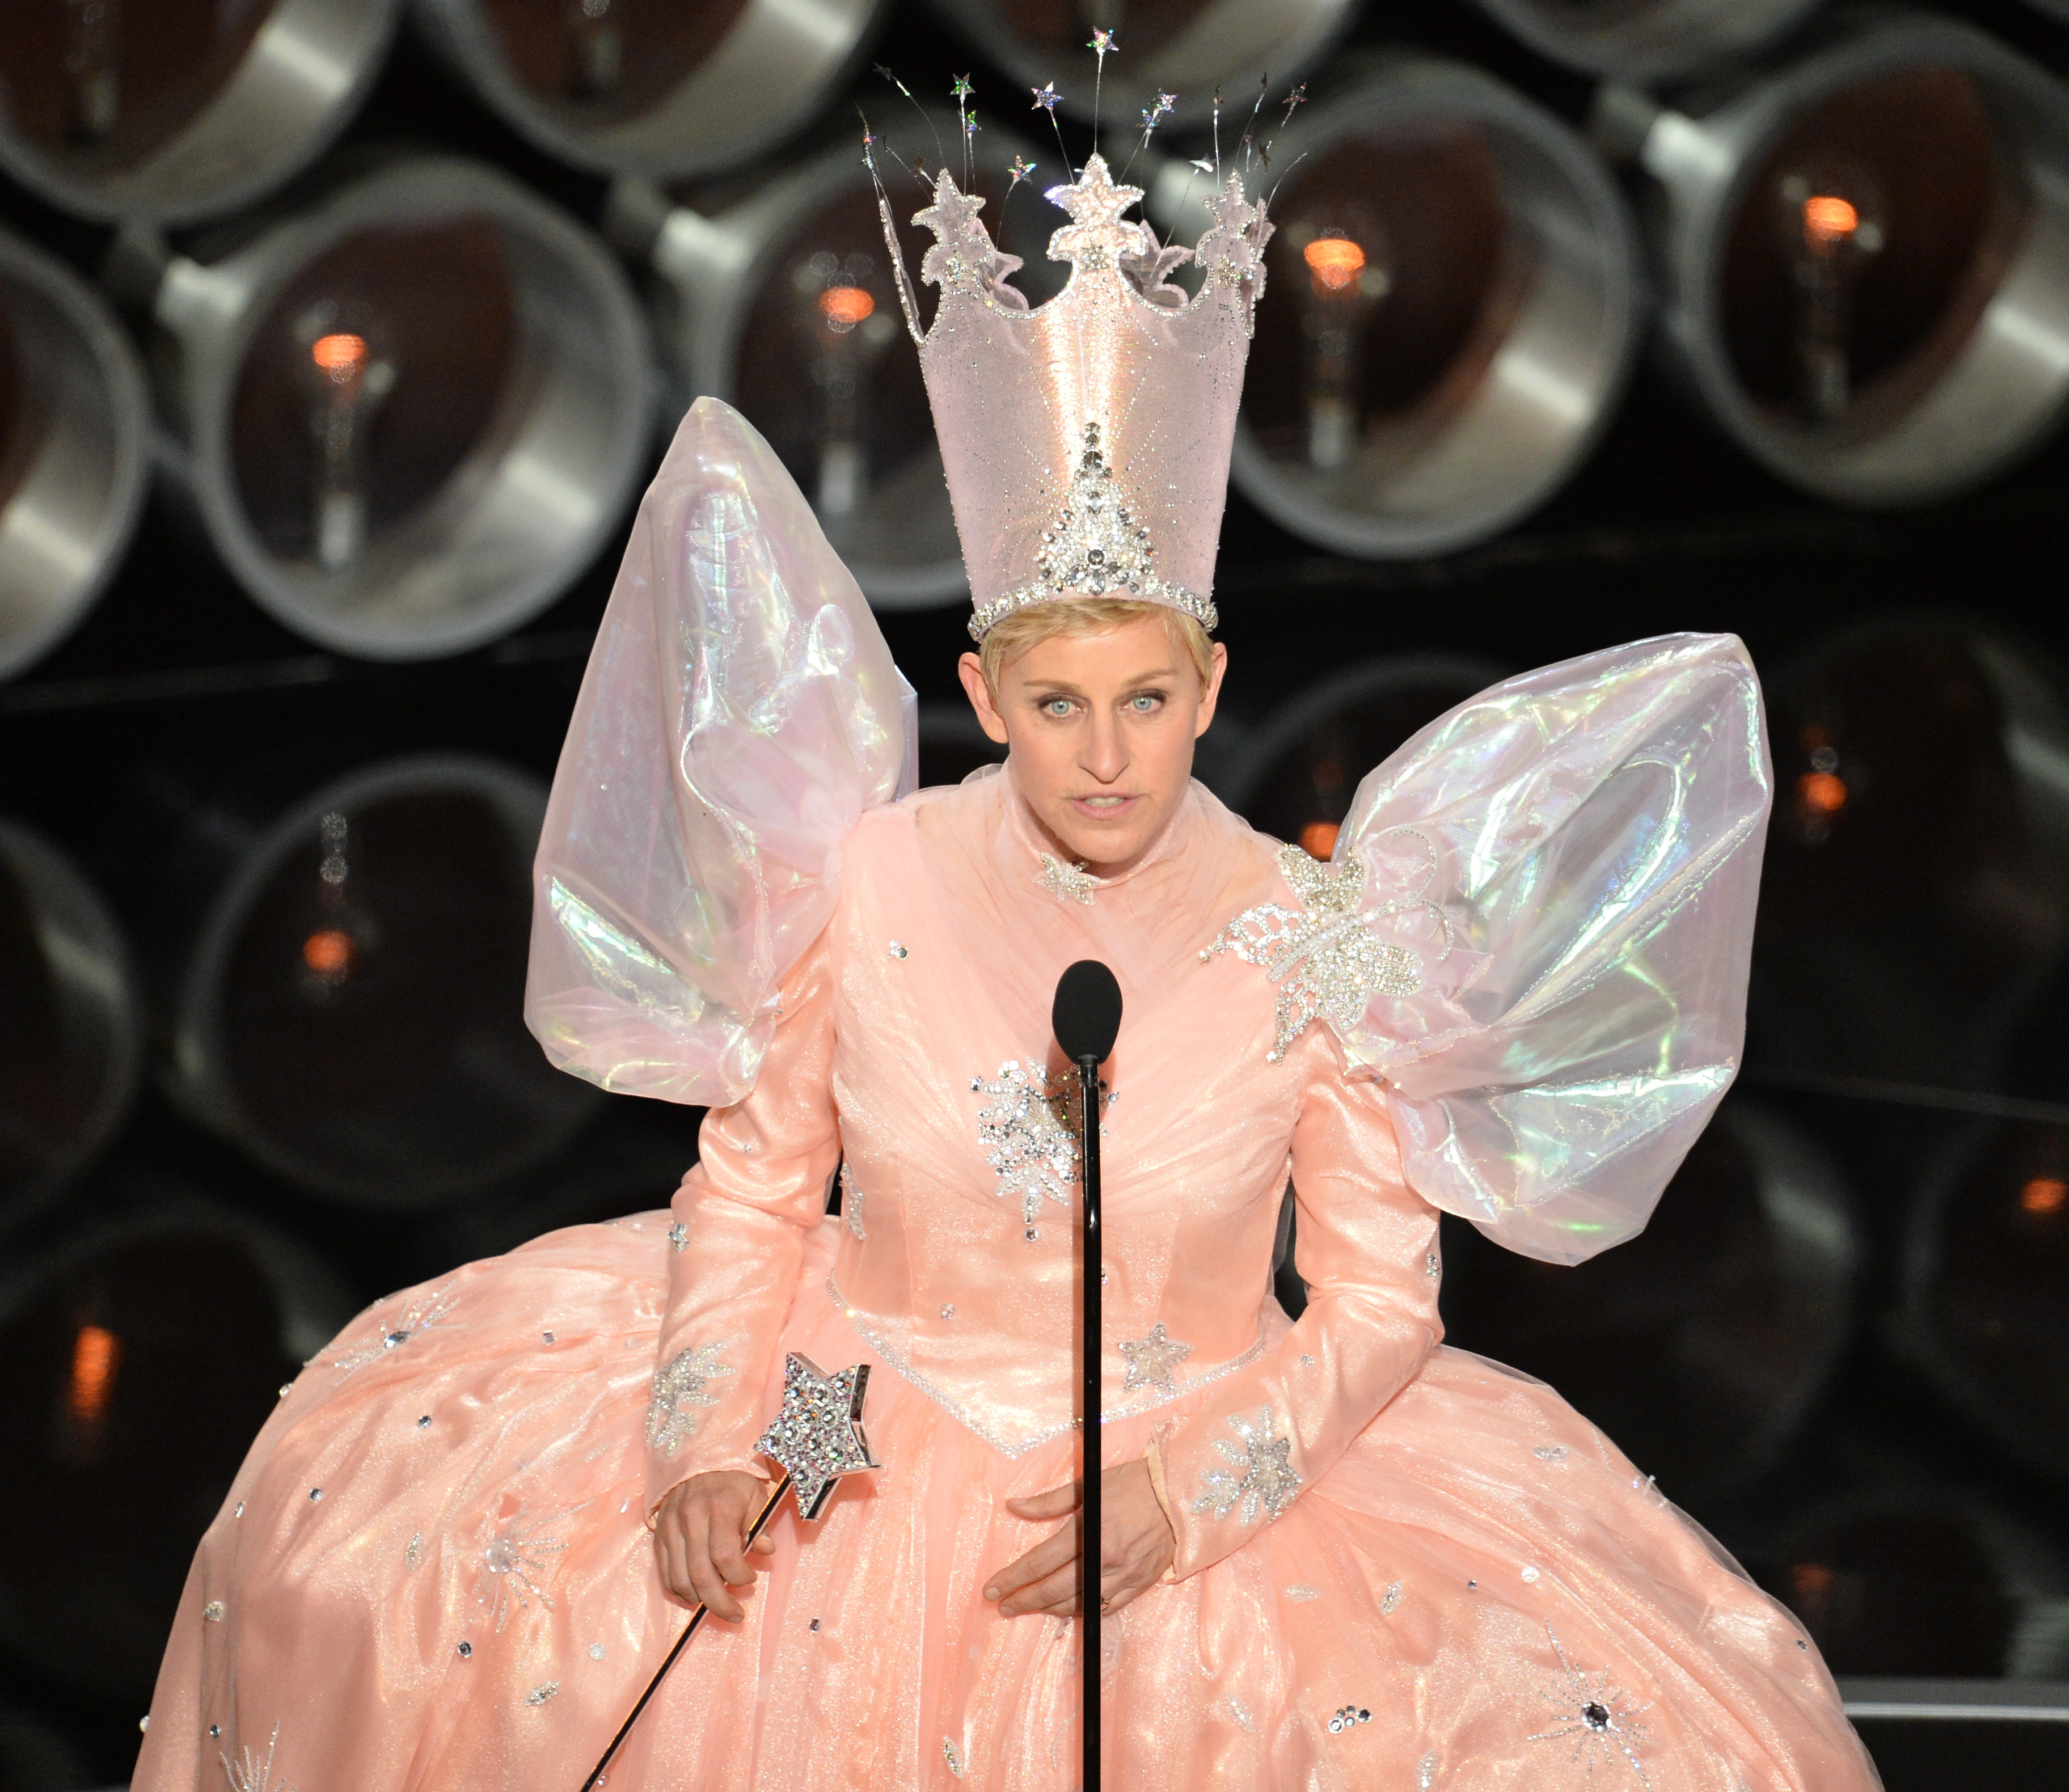 Ellen DeGeneres onstage during the Oscars at the Dolby Theatre on March 2, 2014 in Hollywood, California. (Kevin Winter—Getty Images)